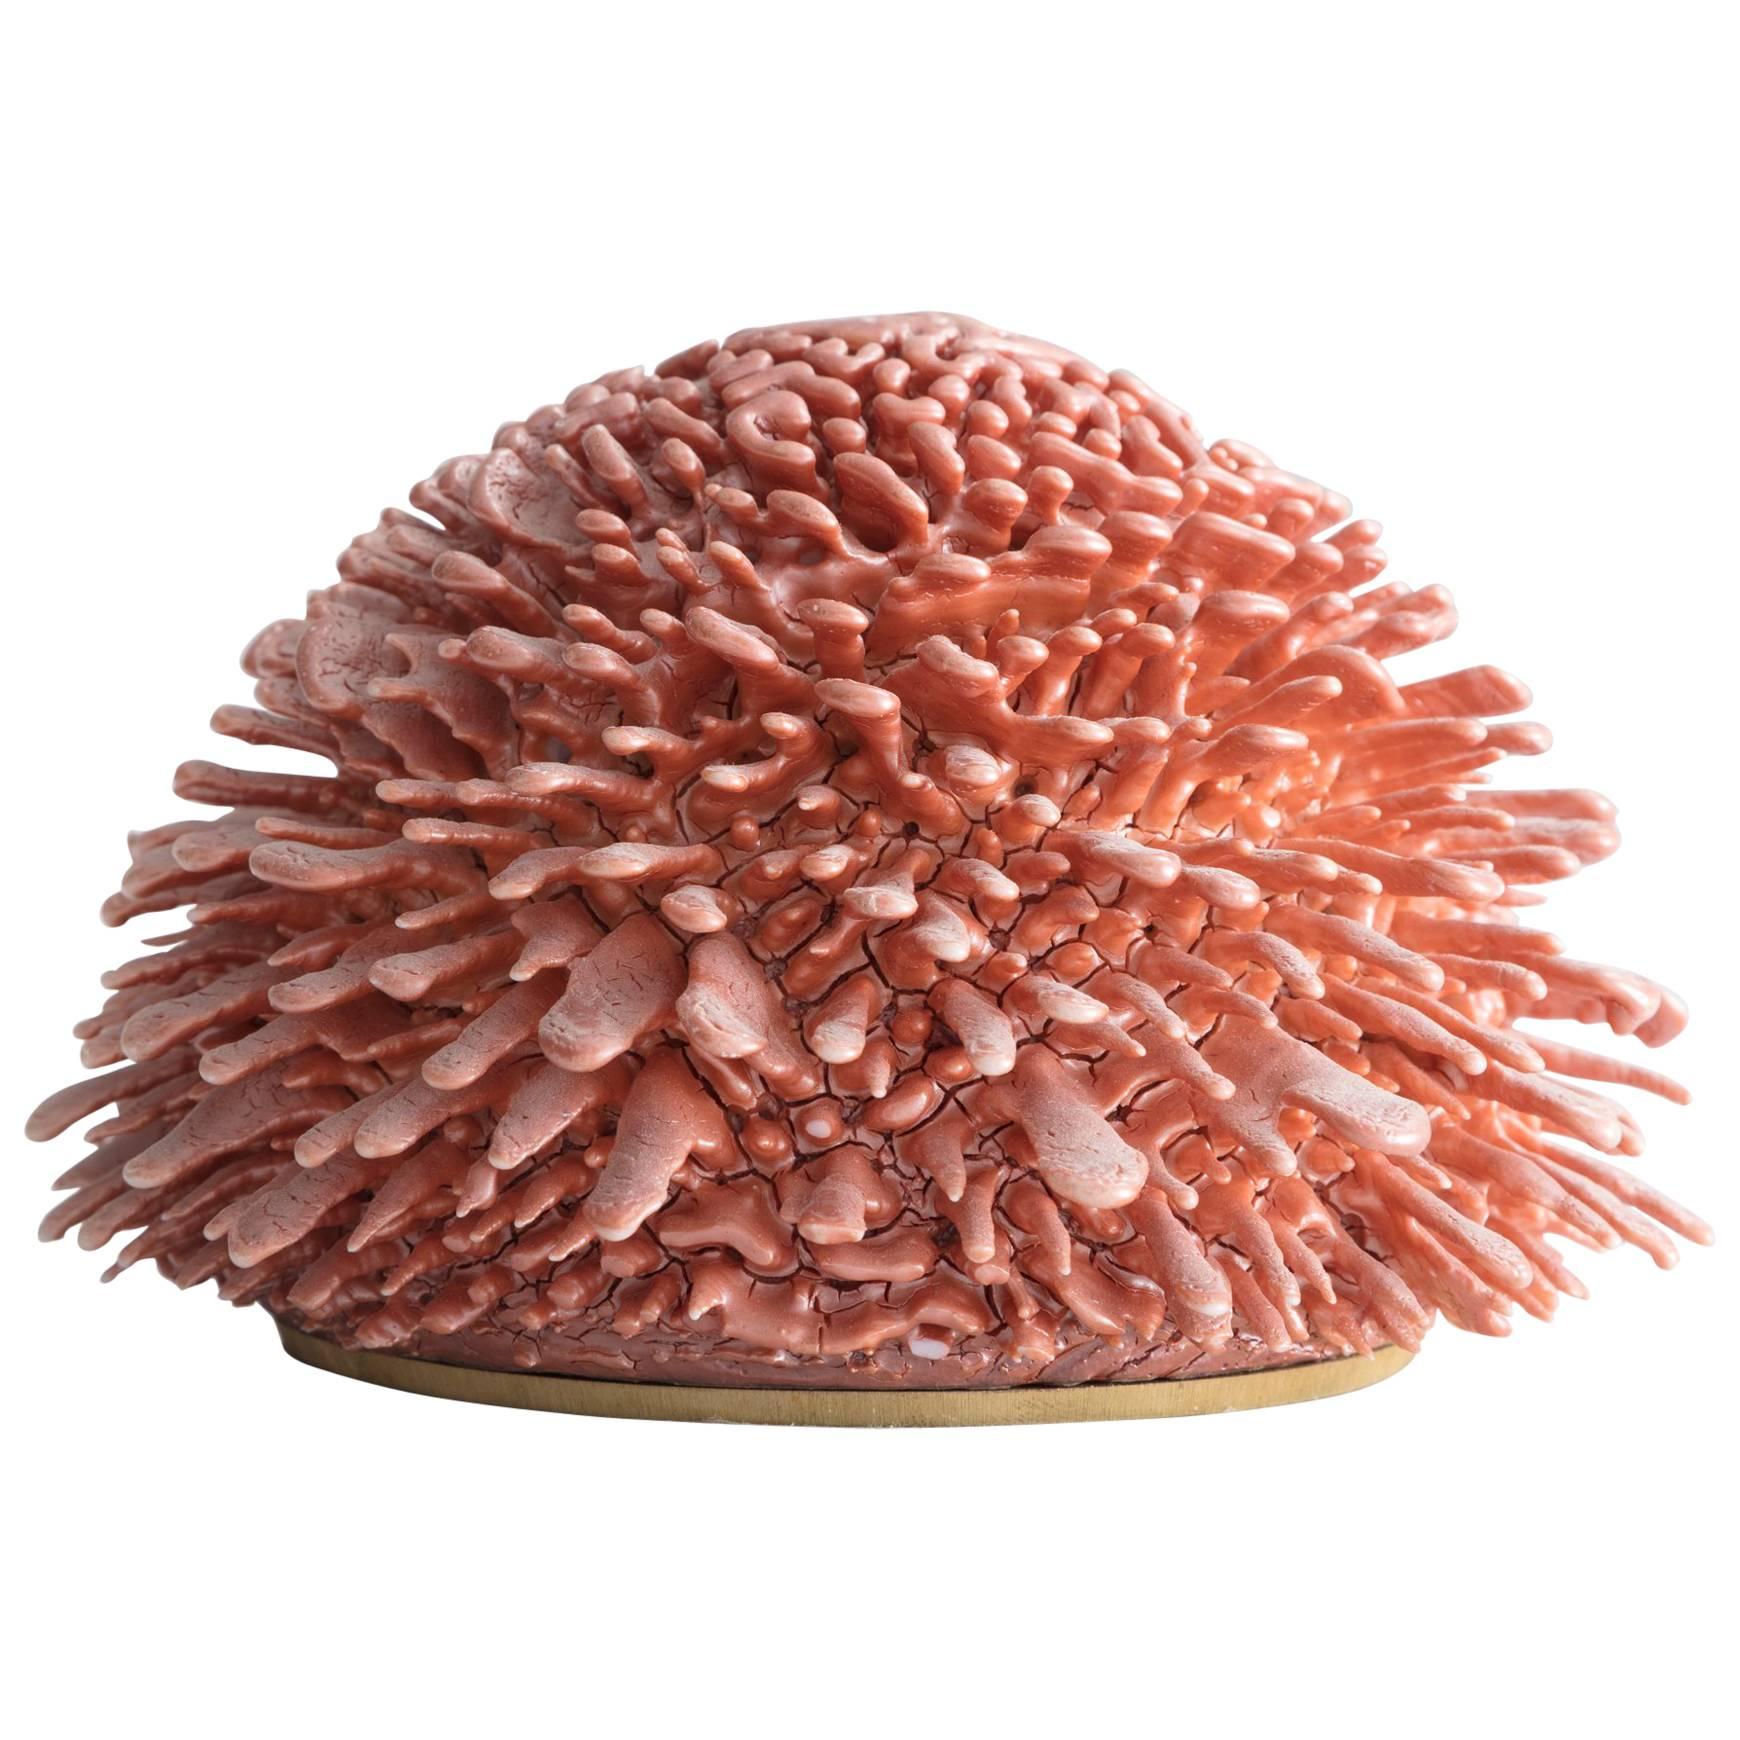 Unique, Hand-Thrown Urchin by The Haas Brothers, USA, 2017